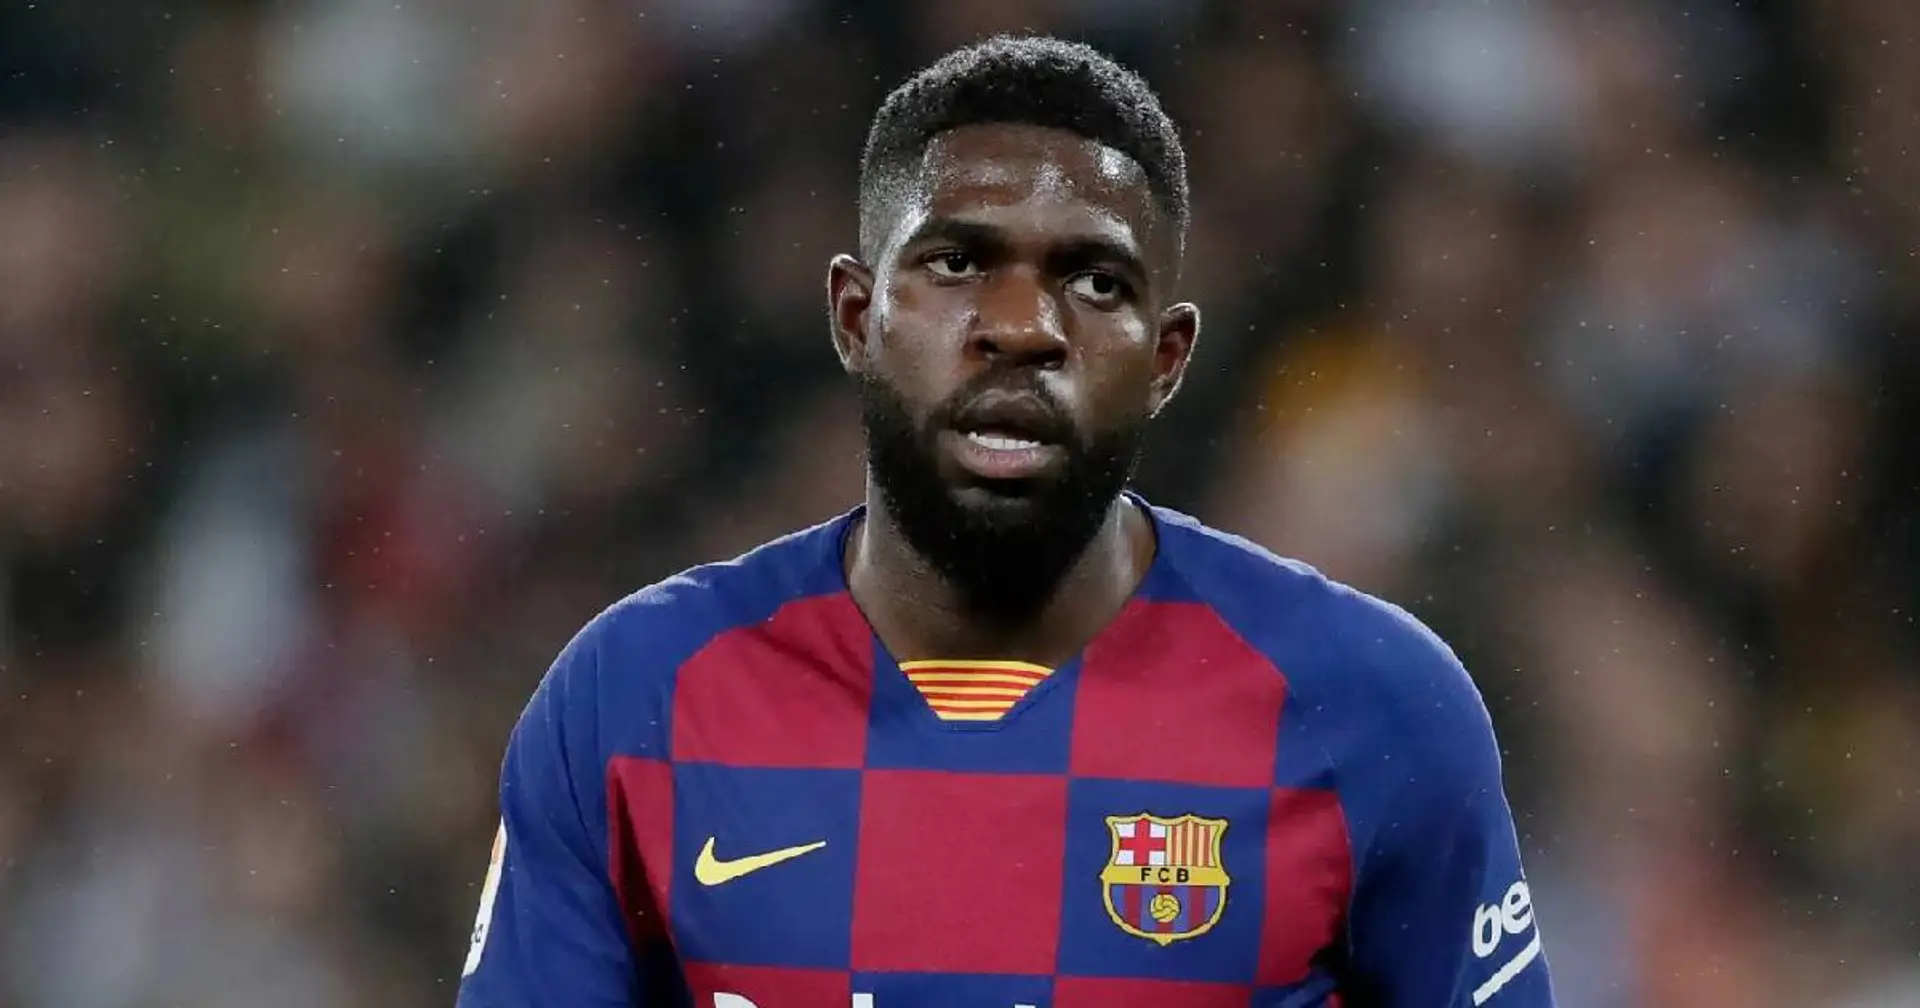 Barca reportedly knew about Umtiti's horrible injury history but offered him long-term deal regardless